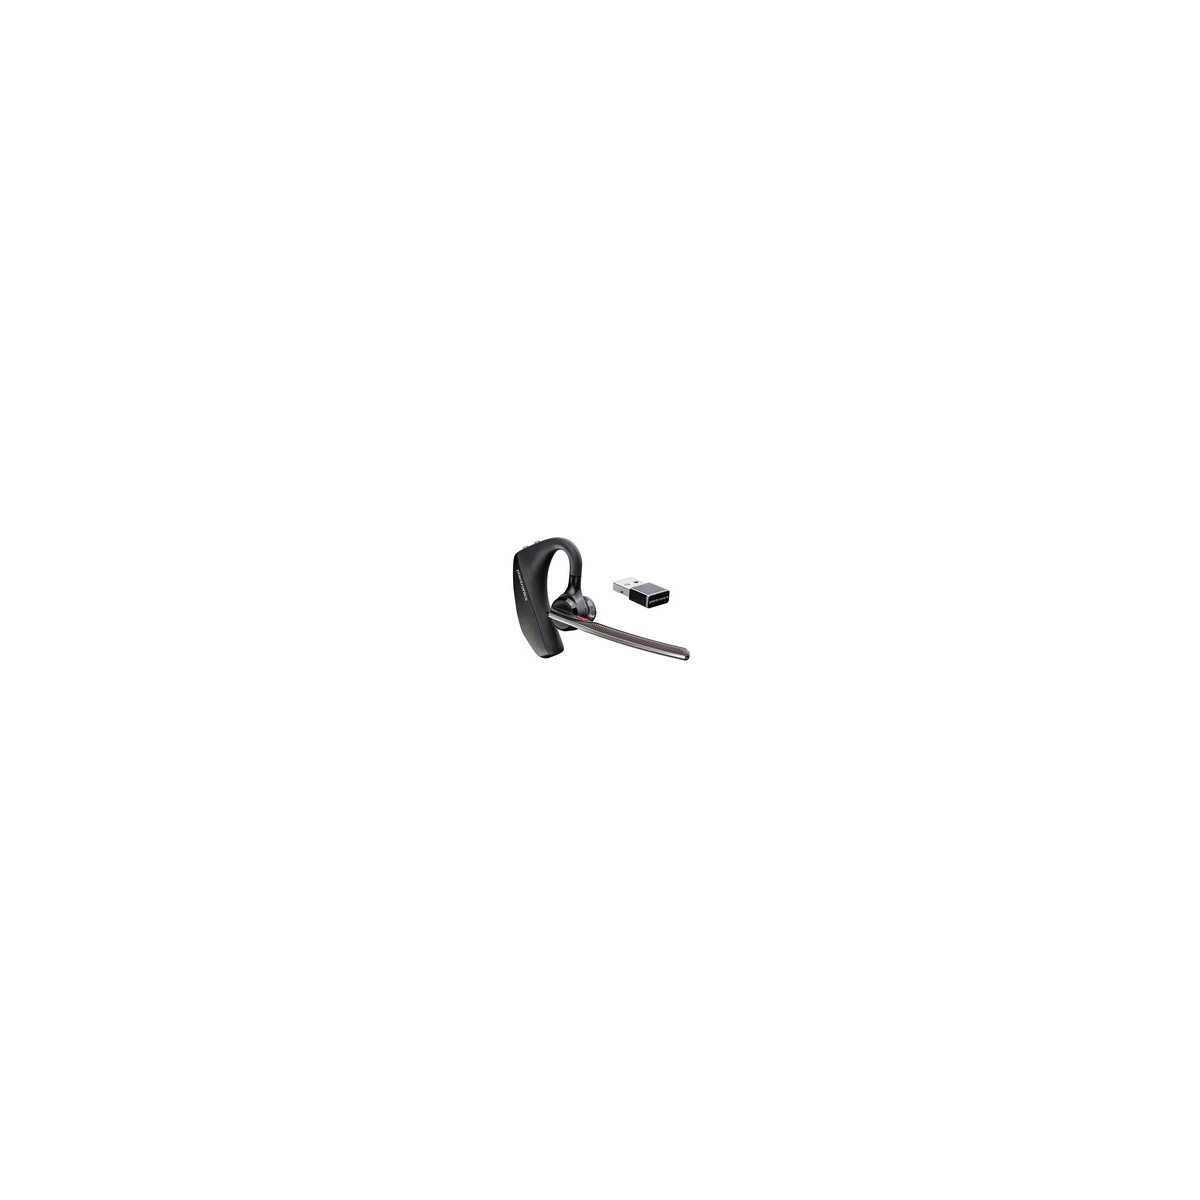 Poly Voyager 5200 UC - Headset - In-ear - Office-Call center - Black - Monaural - Wireless